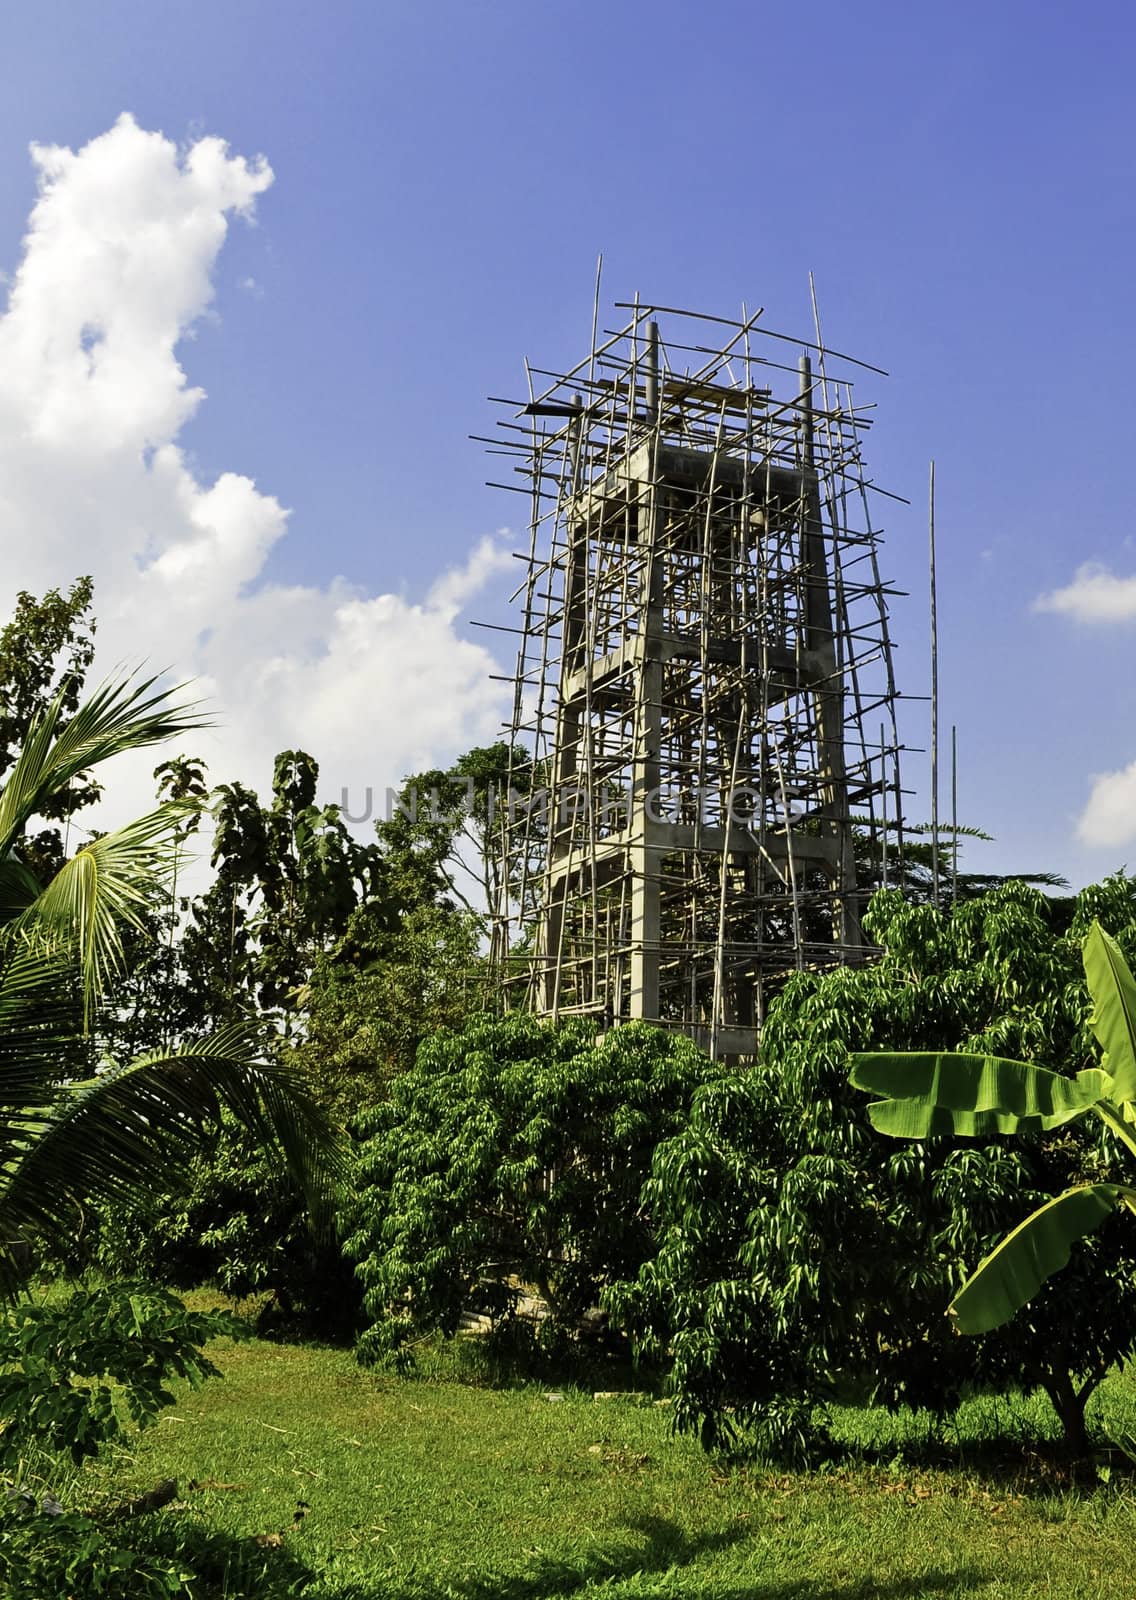 A large tower being constructed in a rural area of Asia